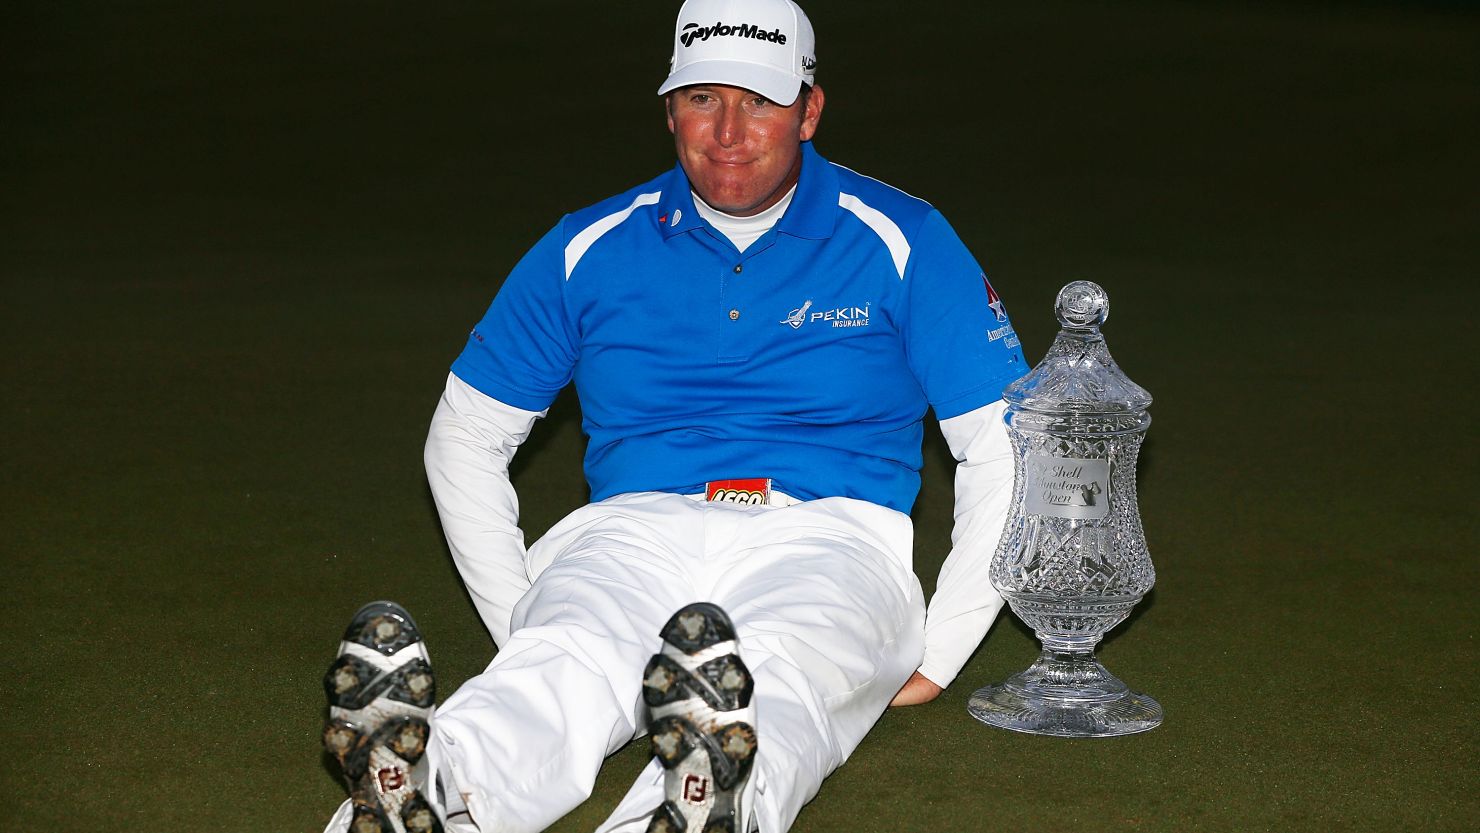 Points celebrated his Houston Open with his best "Dufnering" expression.